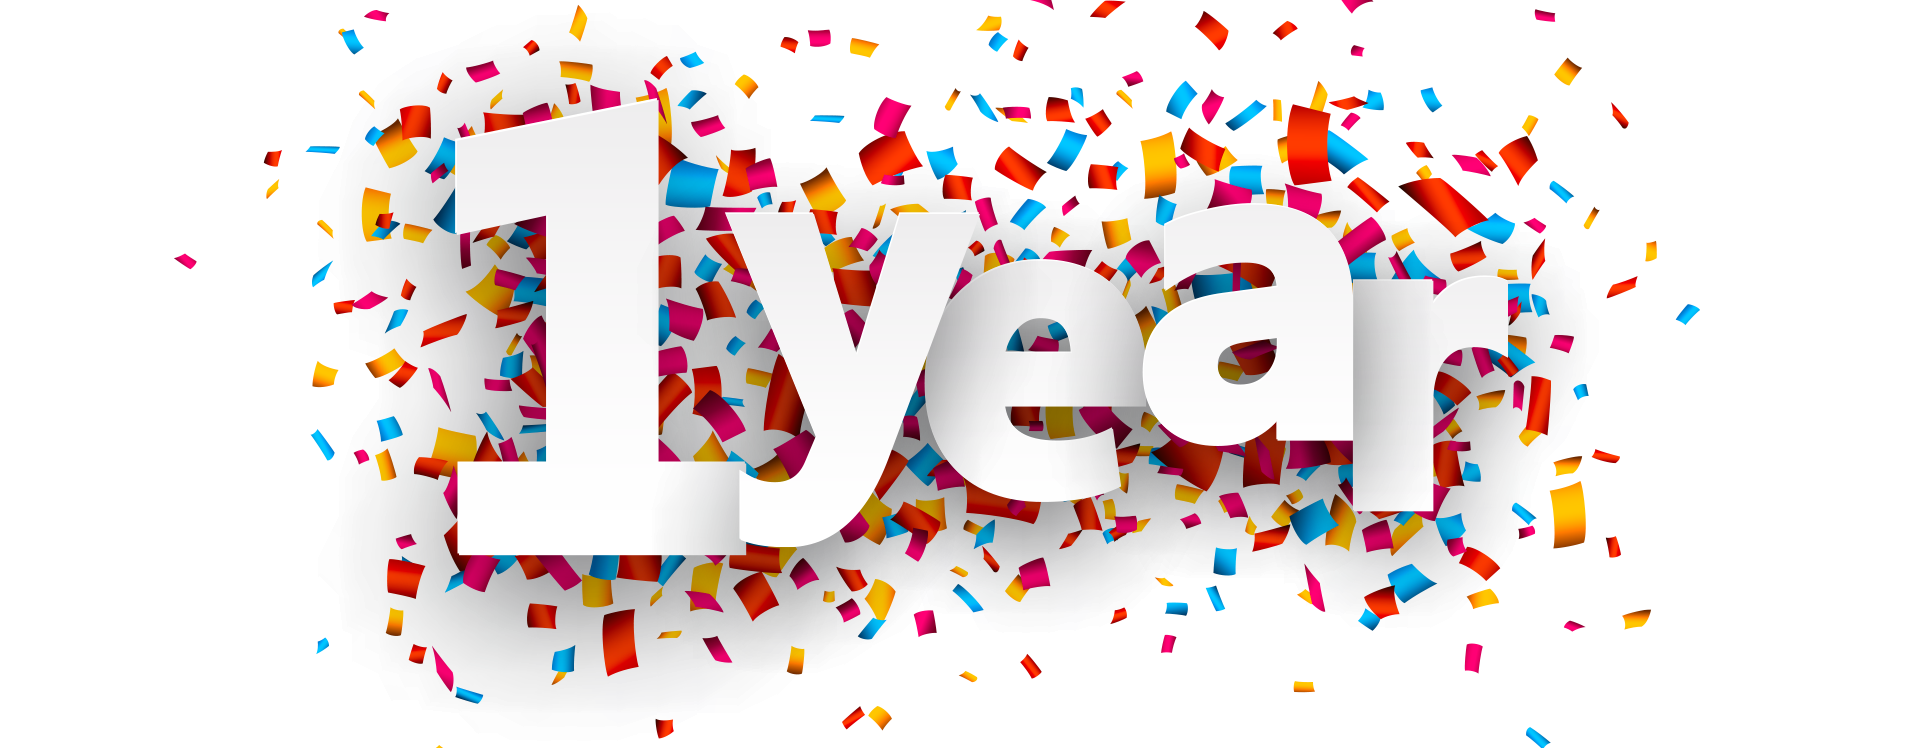 Friday was my one year blog a